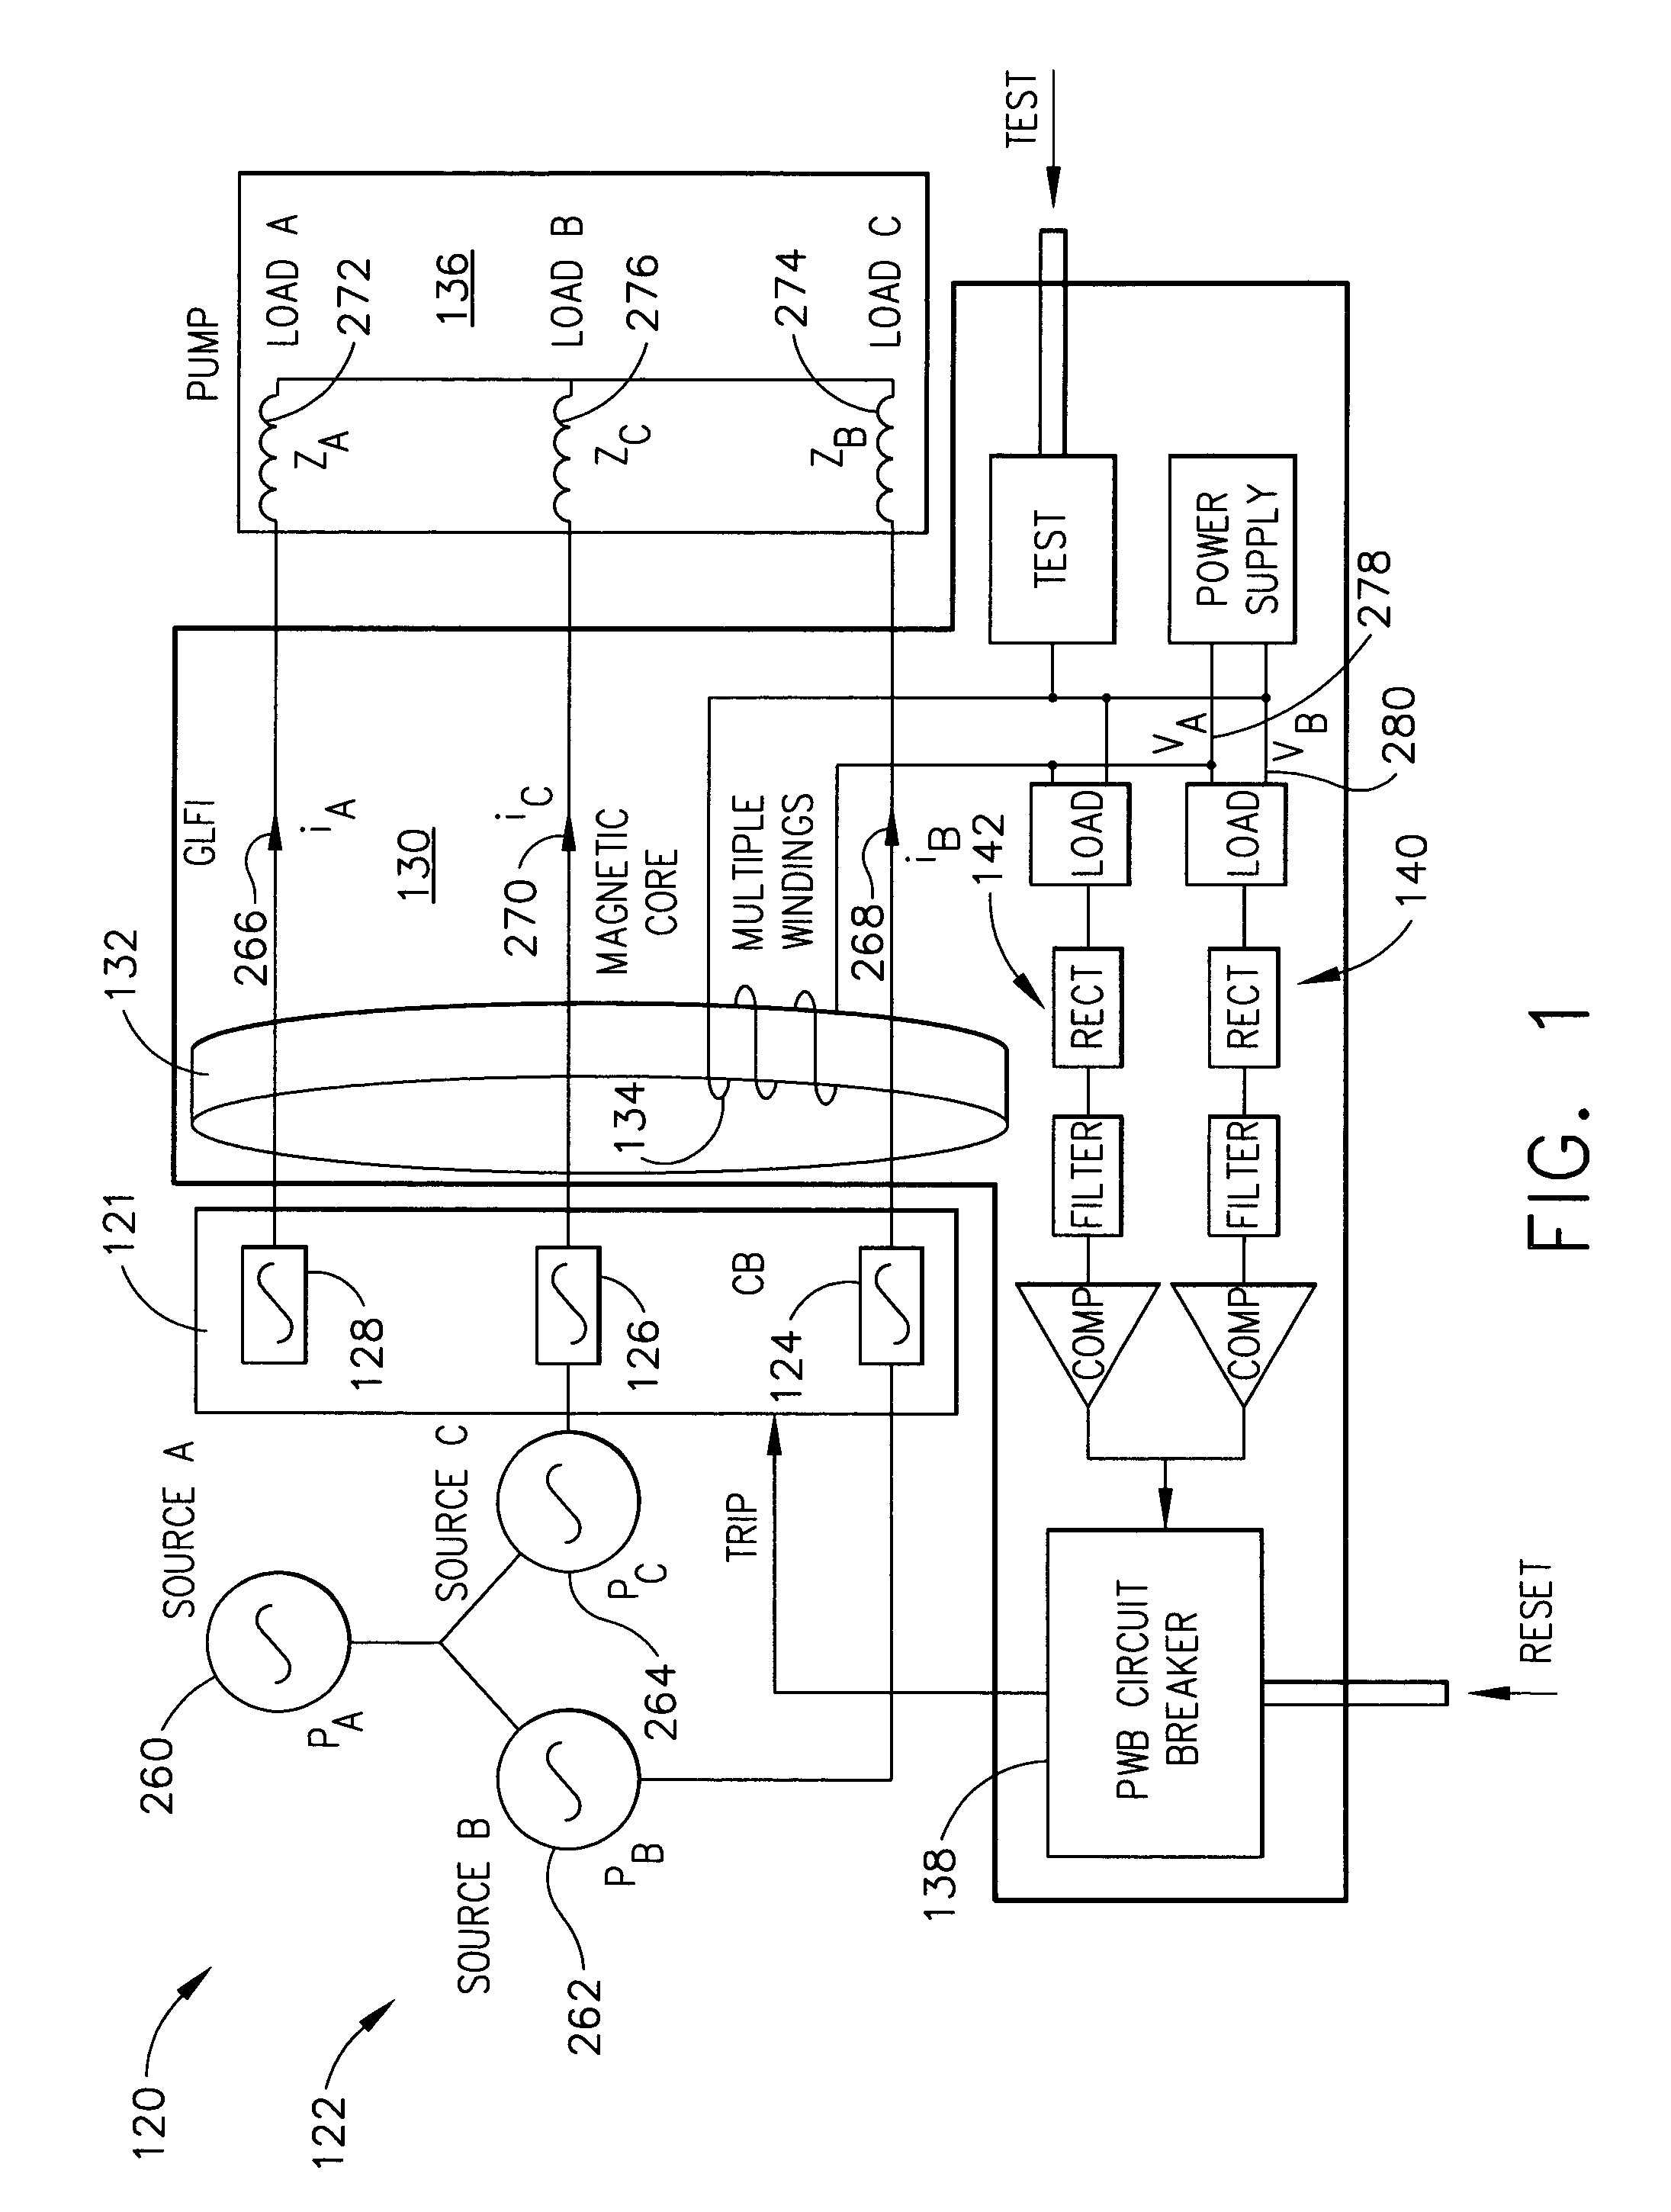 Ground and line fault interrupt controller/adapter